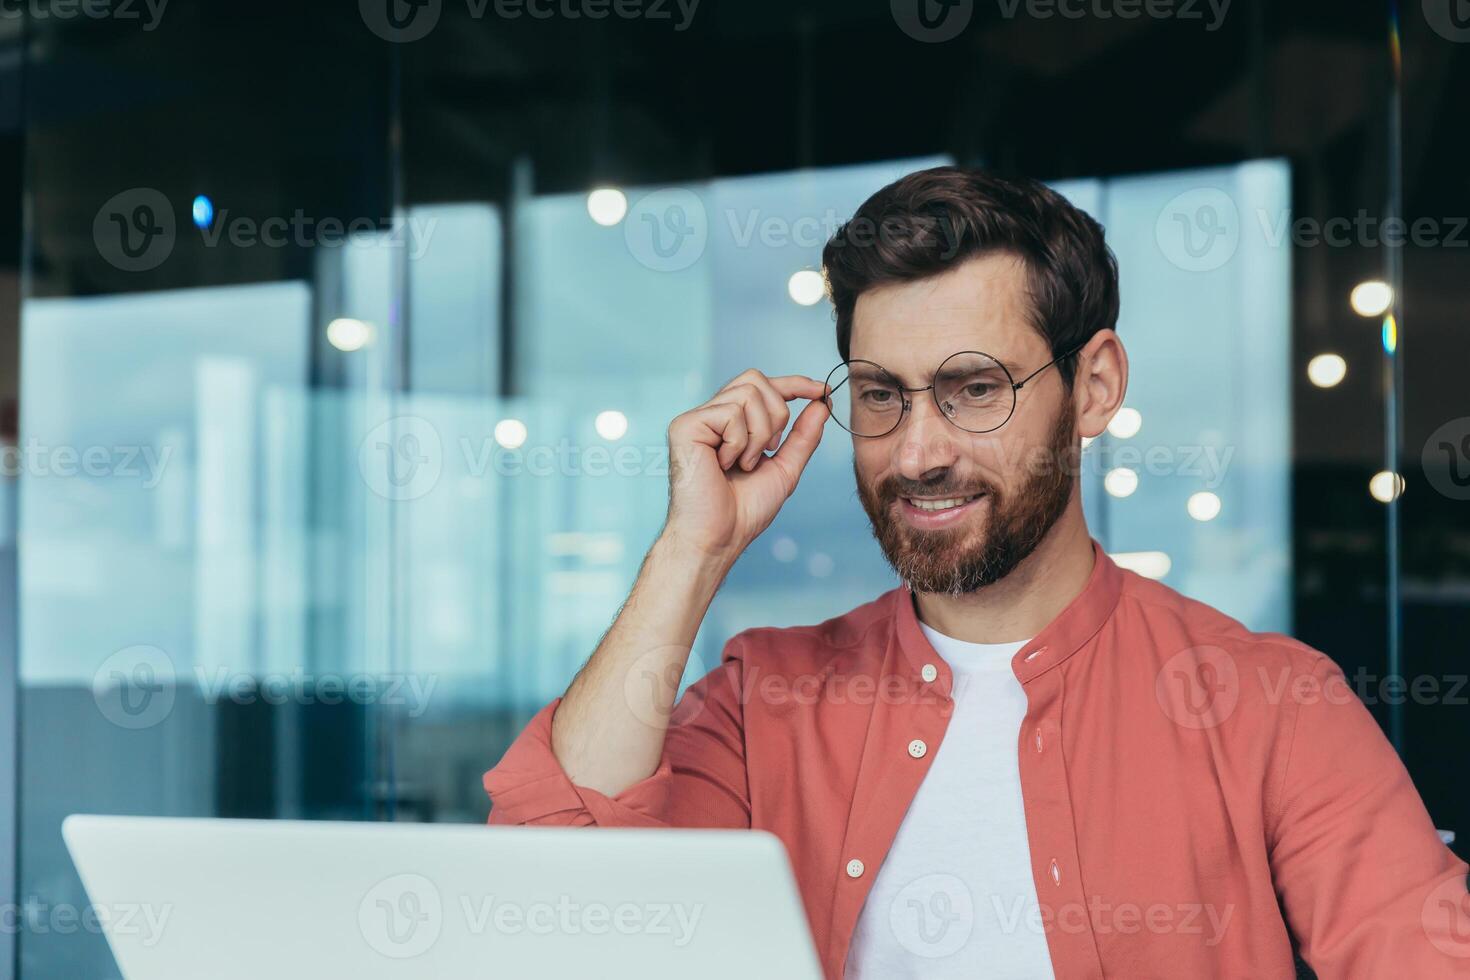 Close-up photo of successful and happy architect working inside modern design studio studio, man in glasses and red shirt smiling and looking at laptop screen.